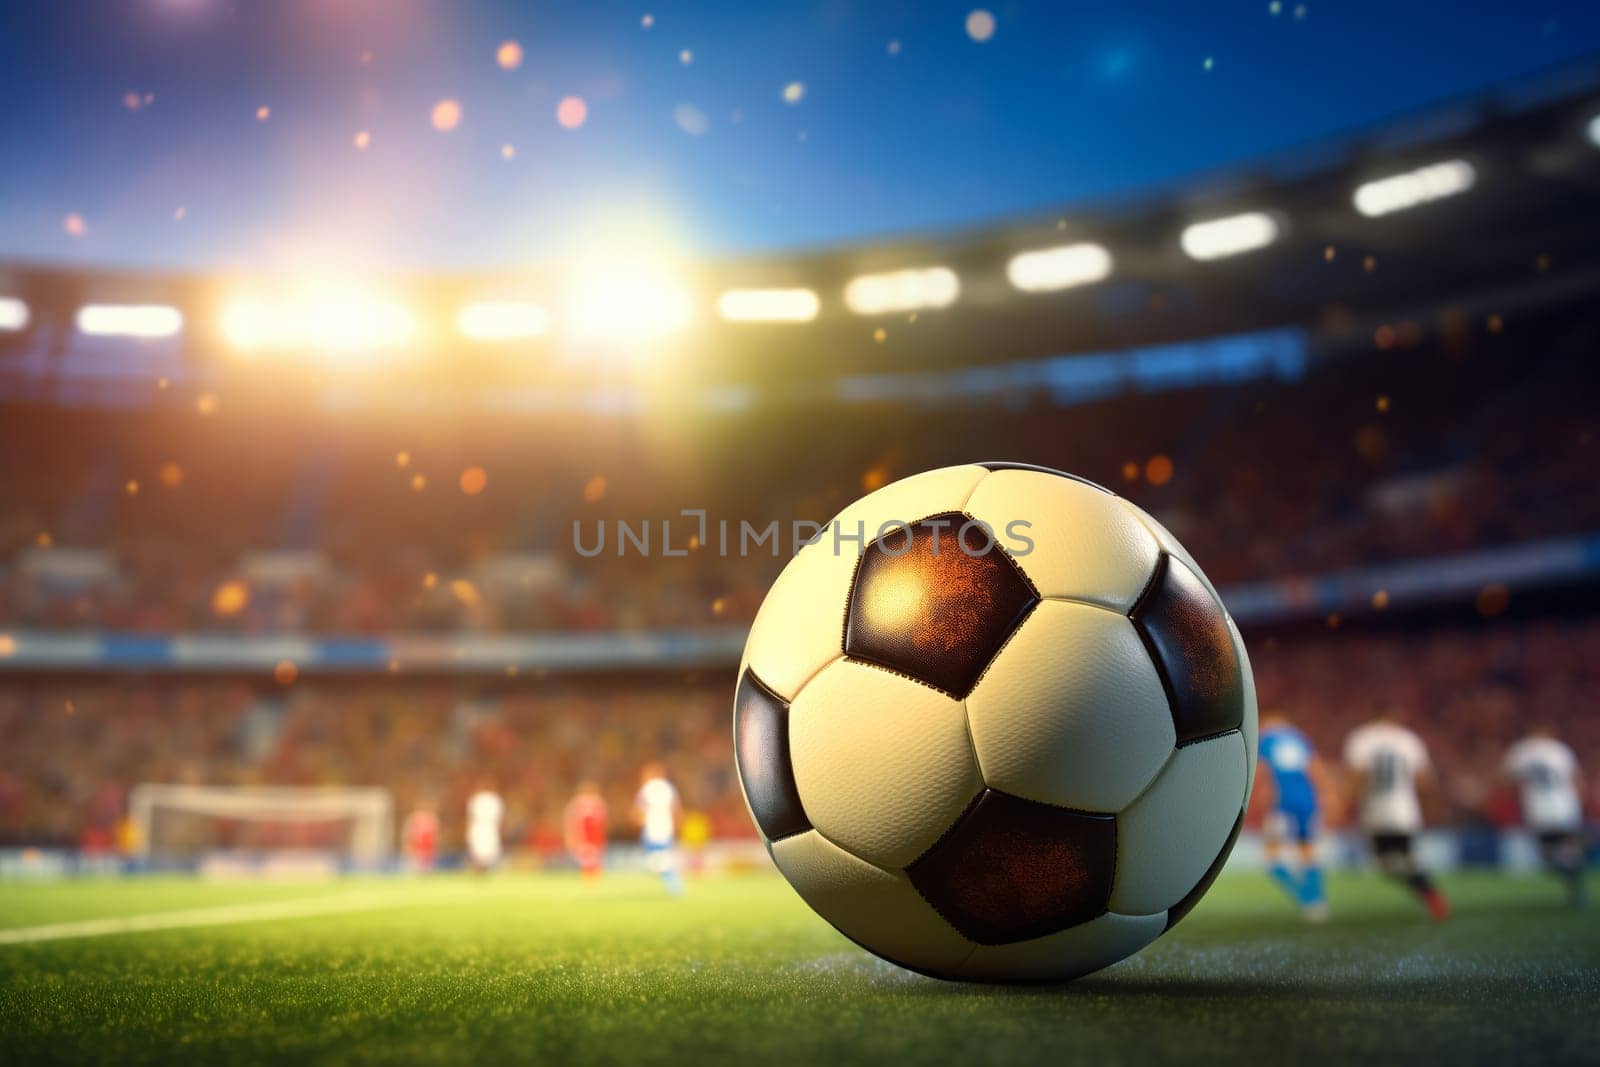 A soccer ball on a green field in soccer football stadium in evening on sunset with floodlights lights during game